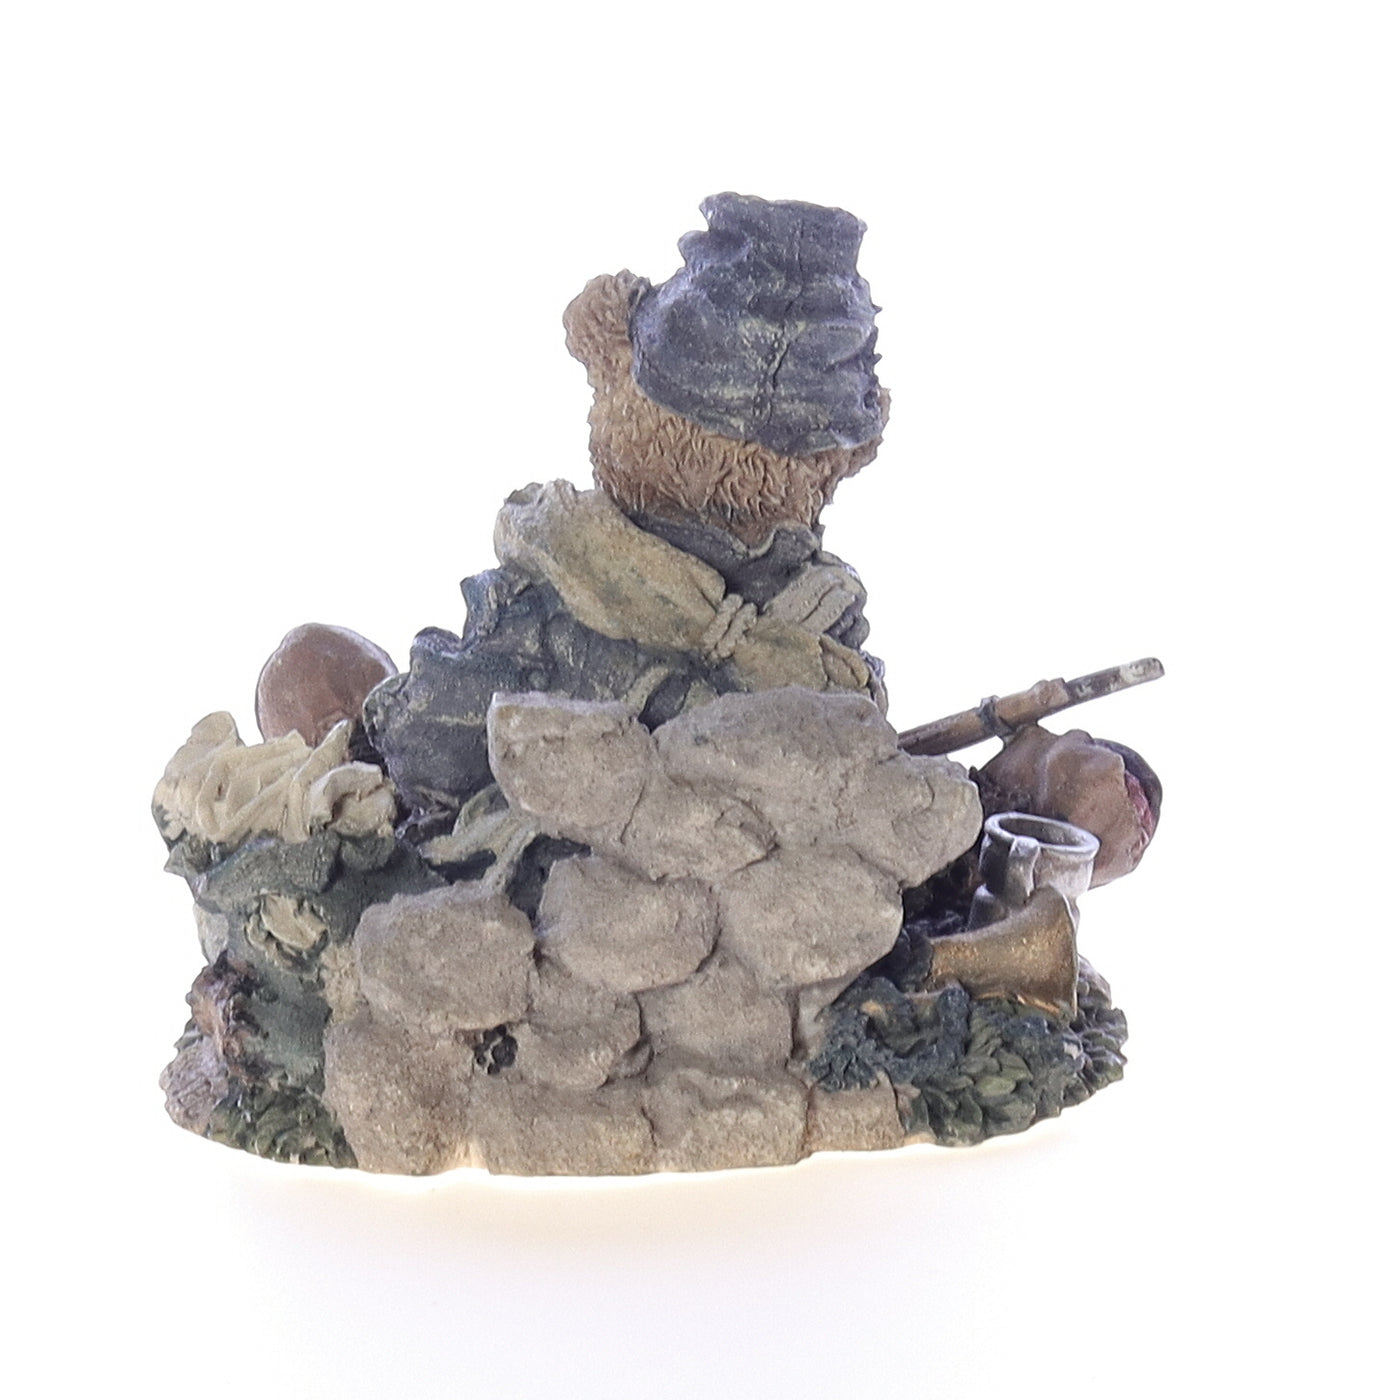 The_Bearstone_Collection_2263_Union_Jack_Love_Letters_Civil_War_Figurine_1995 Back View